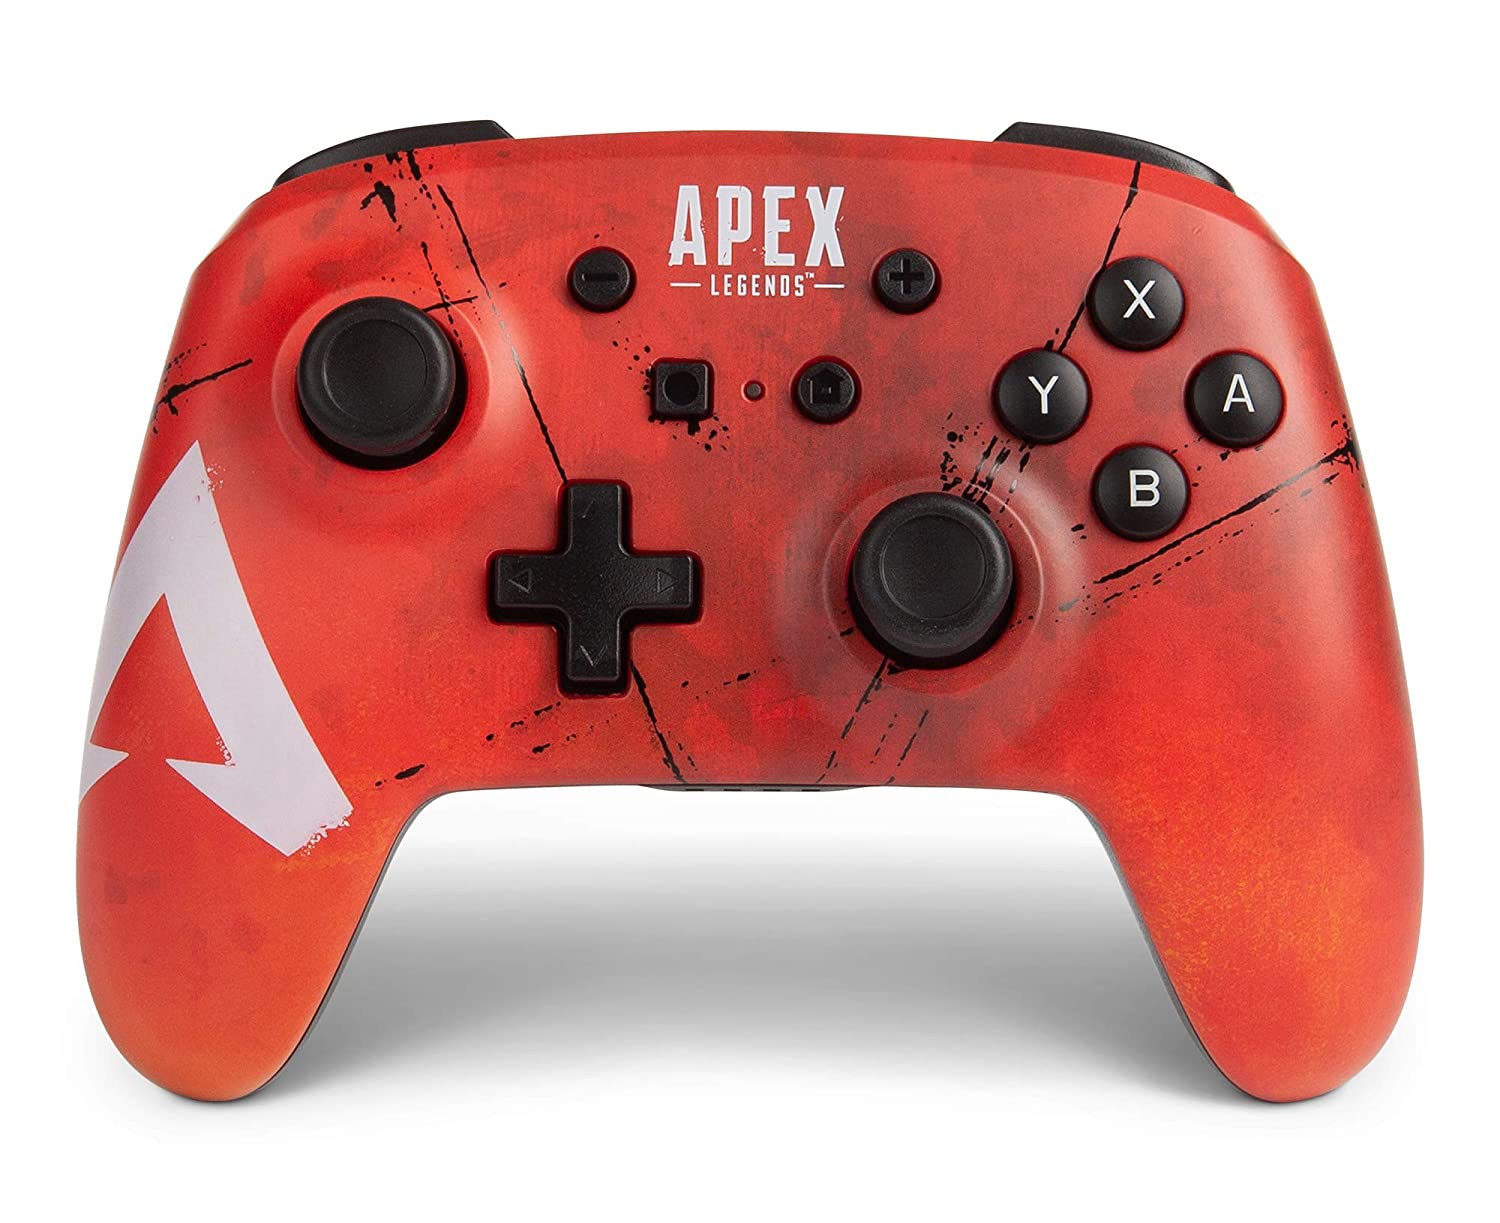 Image for Apex Legends controller for Switch is up for sale on Amazon